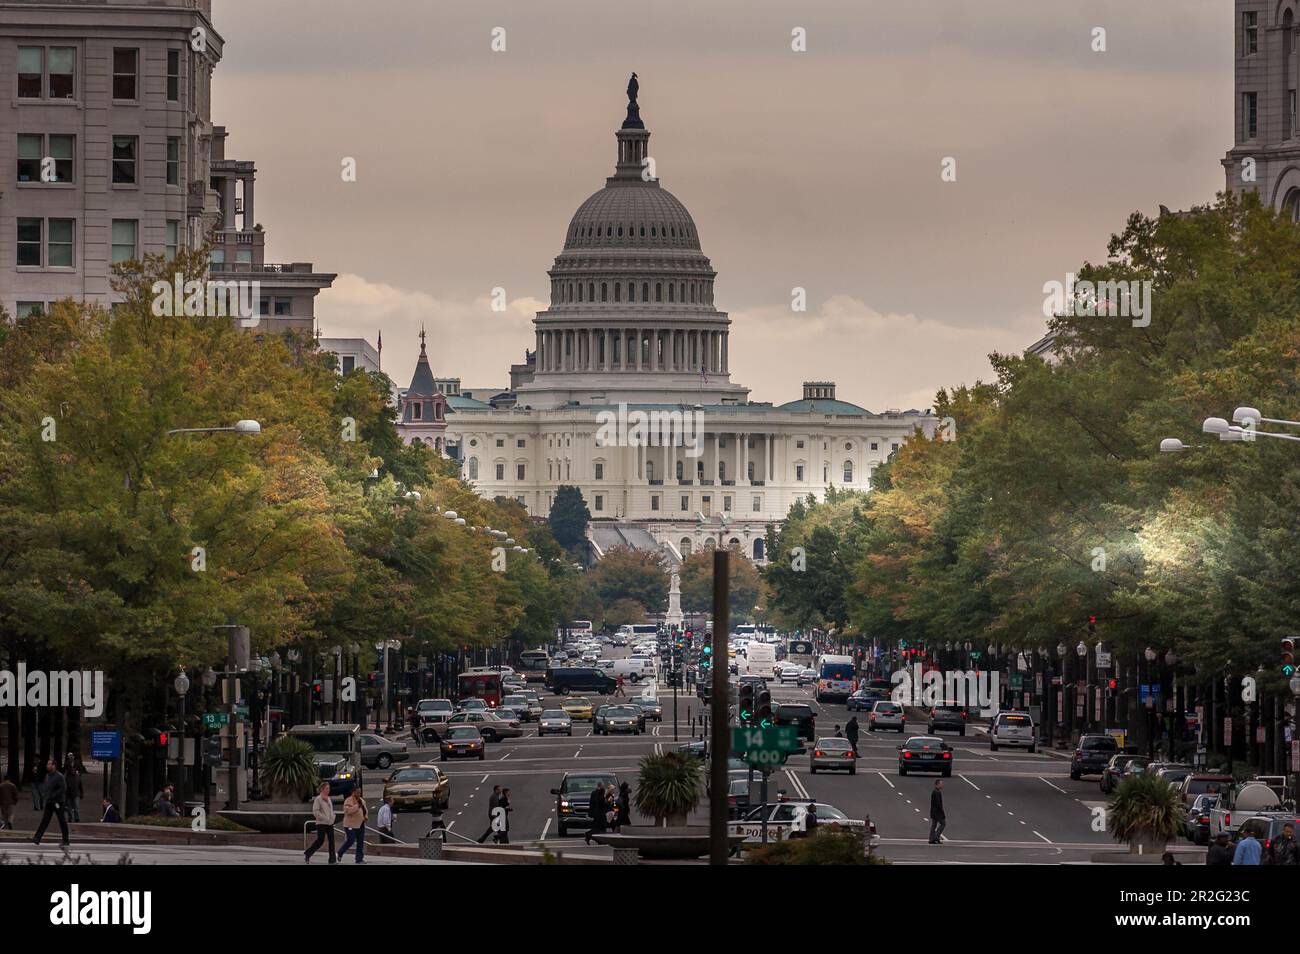 Captivating View of Capitol Hill: Iconic United States Capitol Building amidst the bustling cityscape of Washington, D.C. Stock Photo